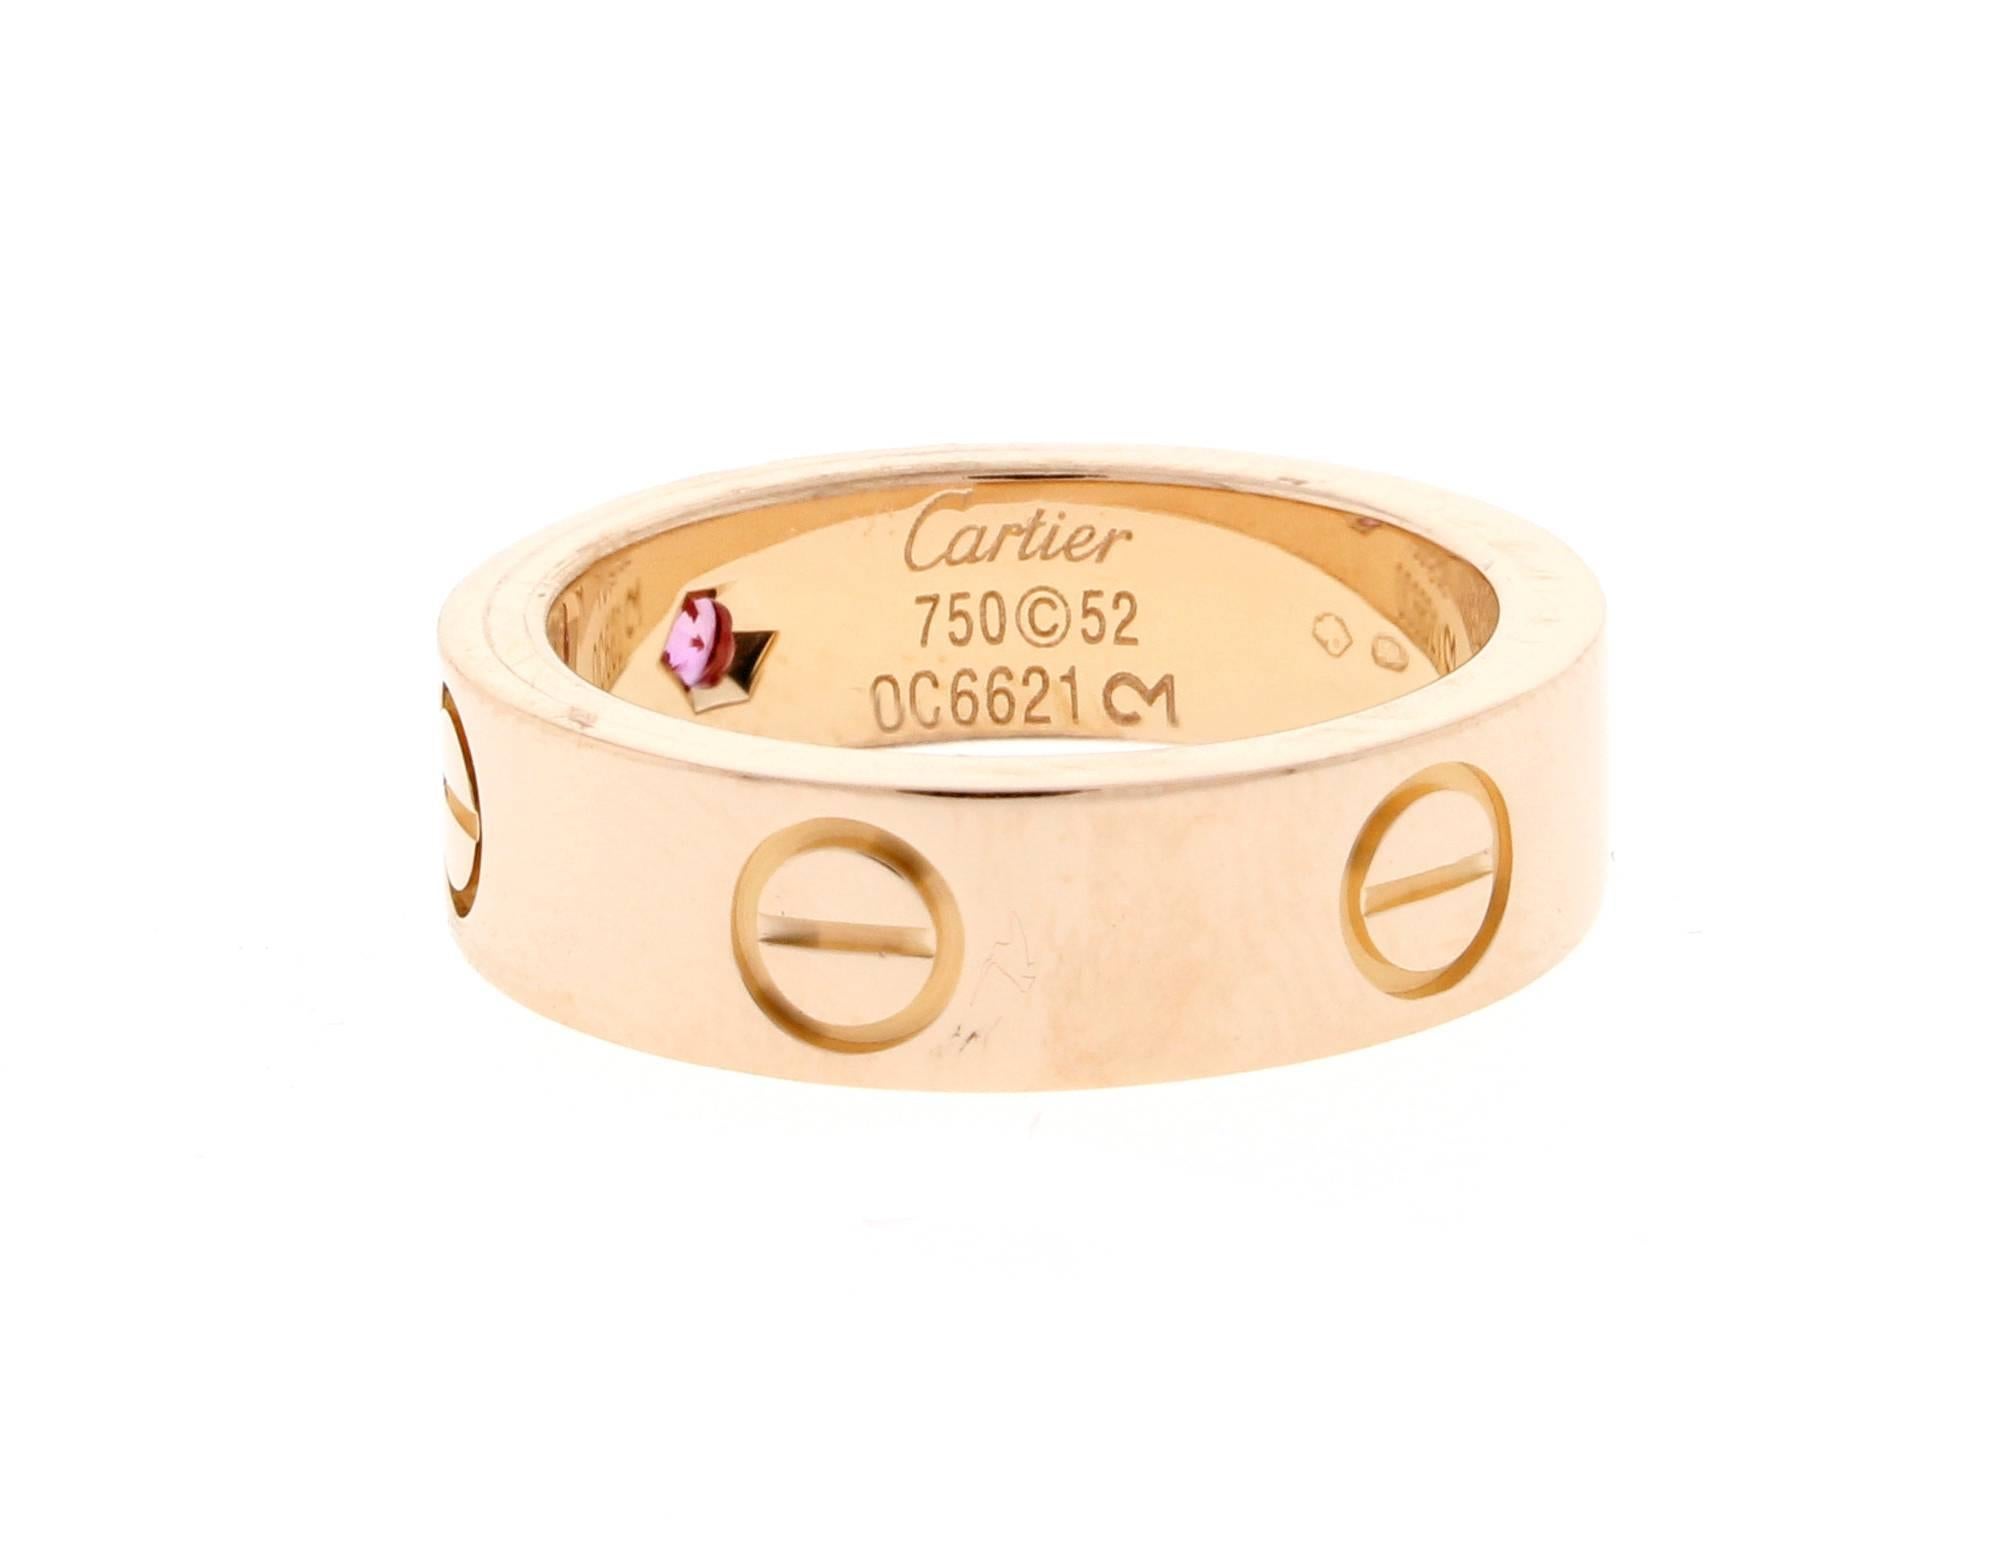 The Cartier LOVE collection remains today an iconic symbol of love that transgresses convention. The screw motifs and undeniable elegance establish the piece as a timeless tribute to passionate romance. Single Pink Sapphire in pink 18 karat gold, 